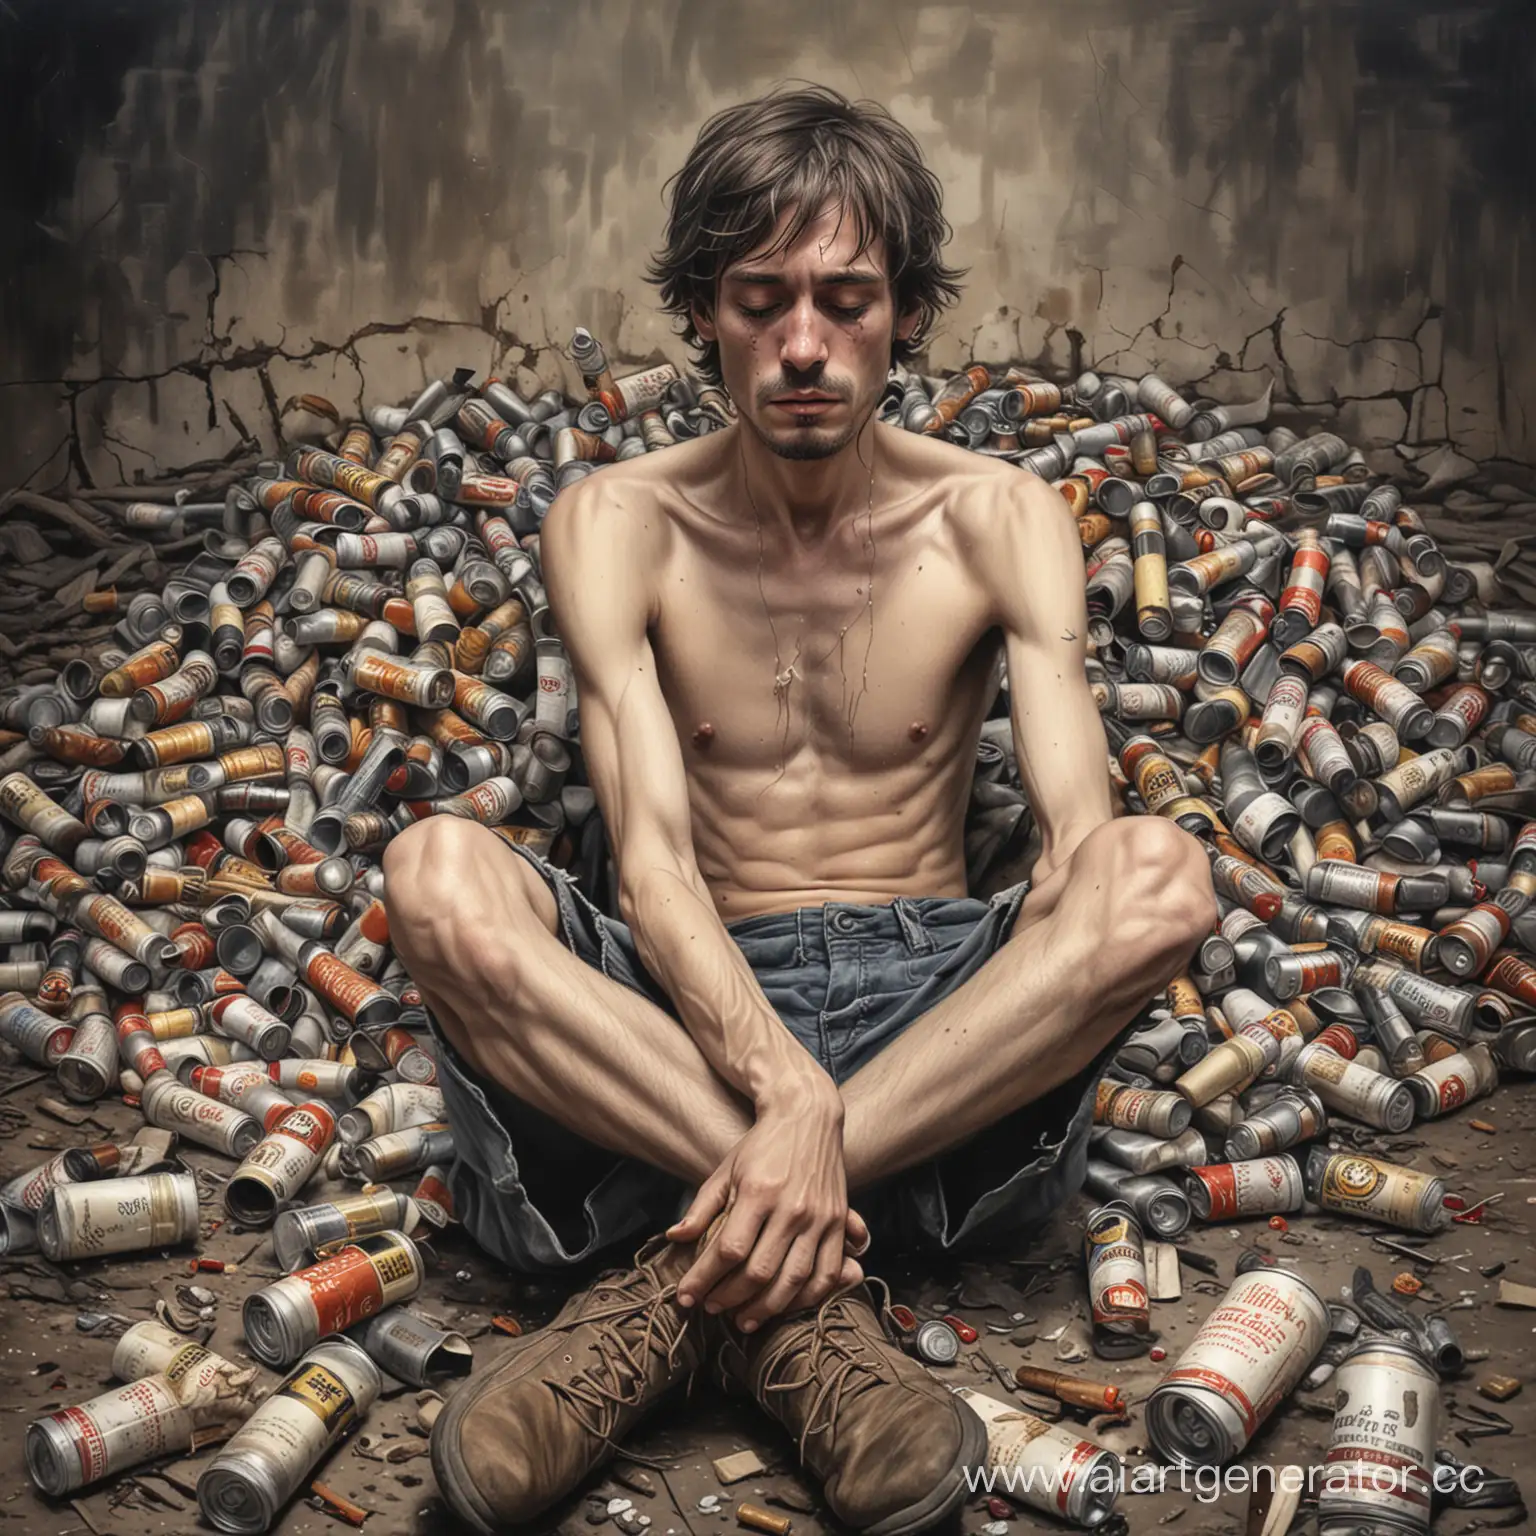 Depiction-of-Addiction-Despair-and-Isolation-in-Substance-Abuse